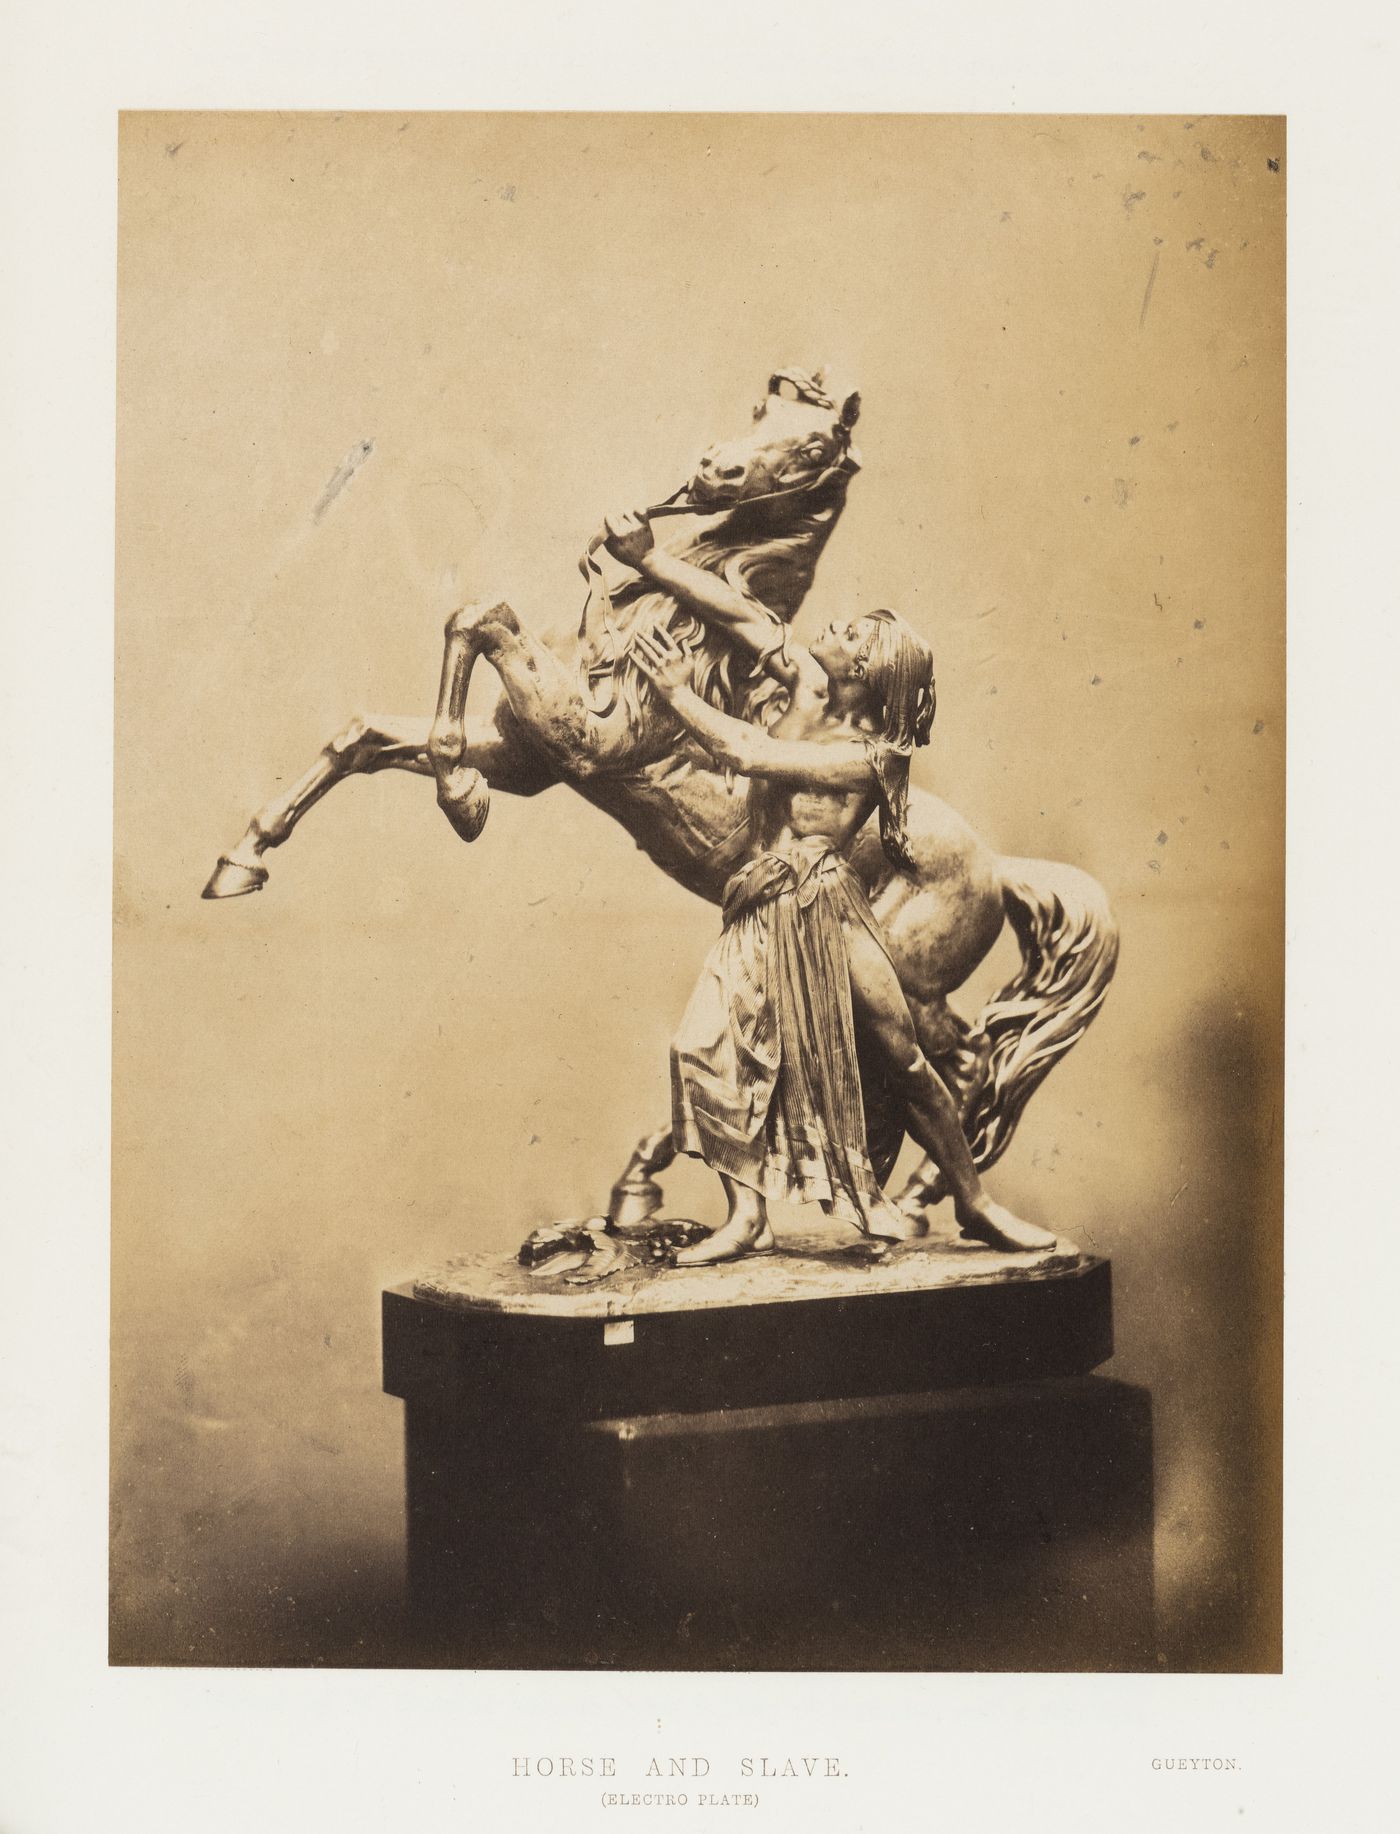 View of electroplated sculpture titled "Horse and Slave", by Gueyton, London, England